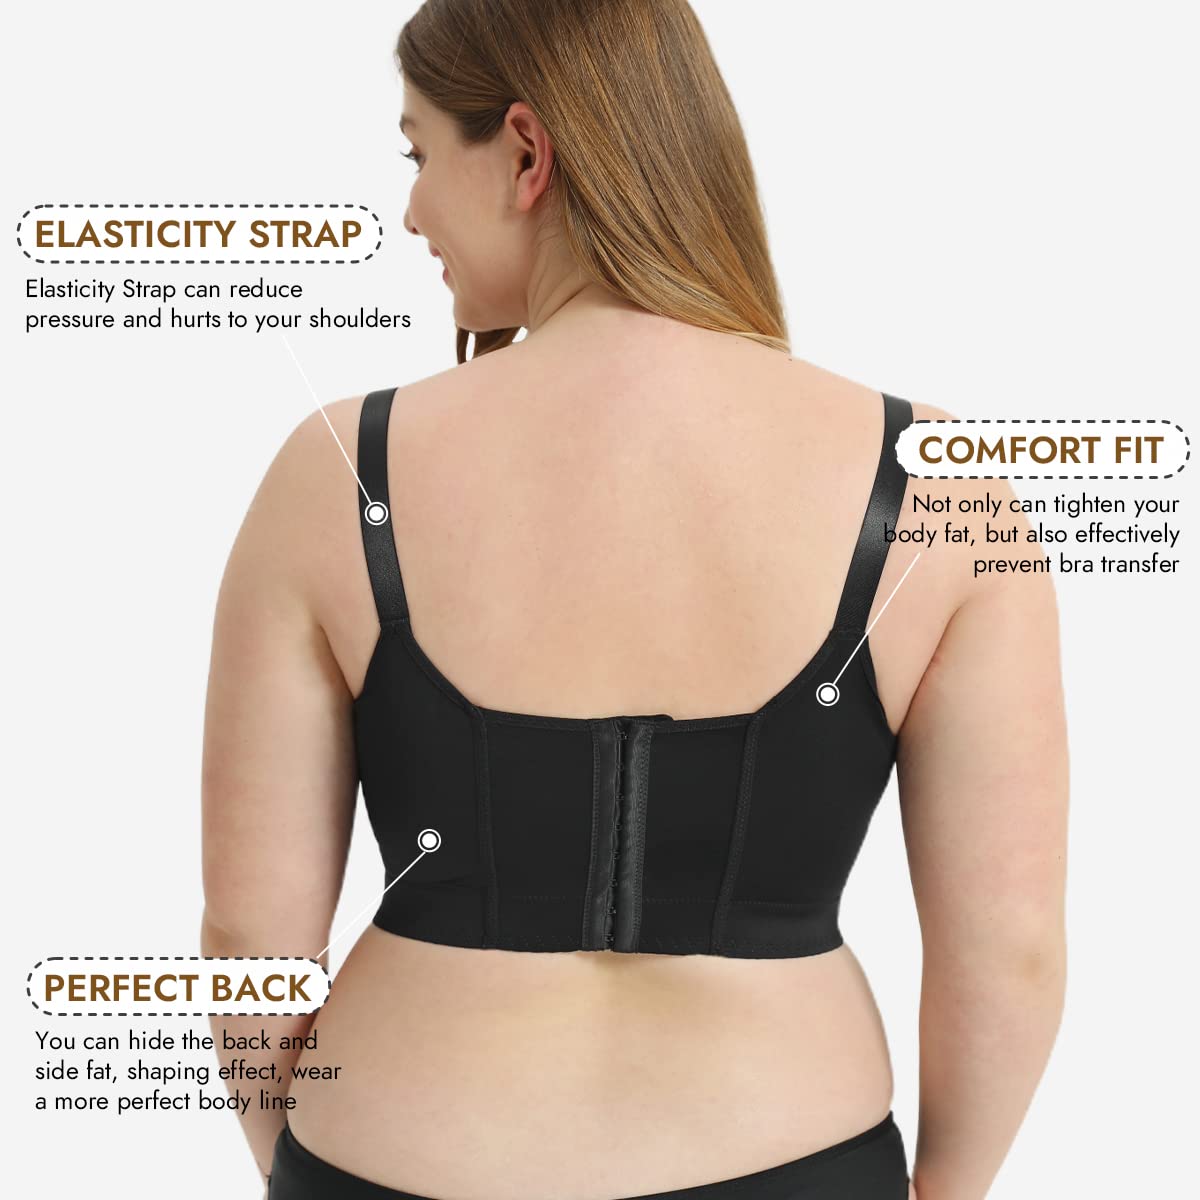 10 best smoothing bras to cover back fat in 2022